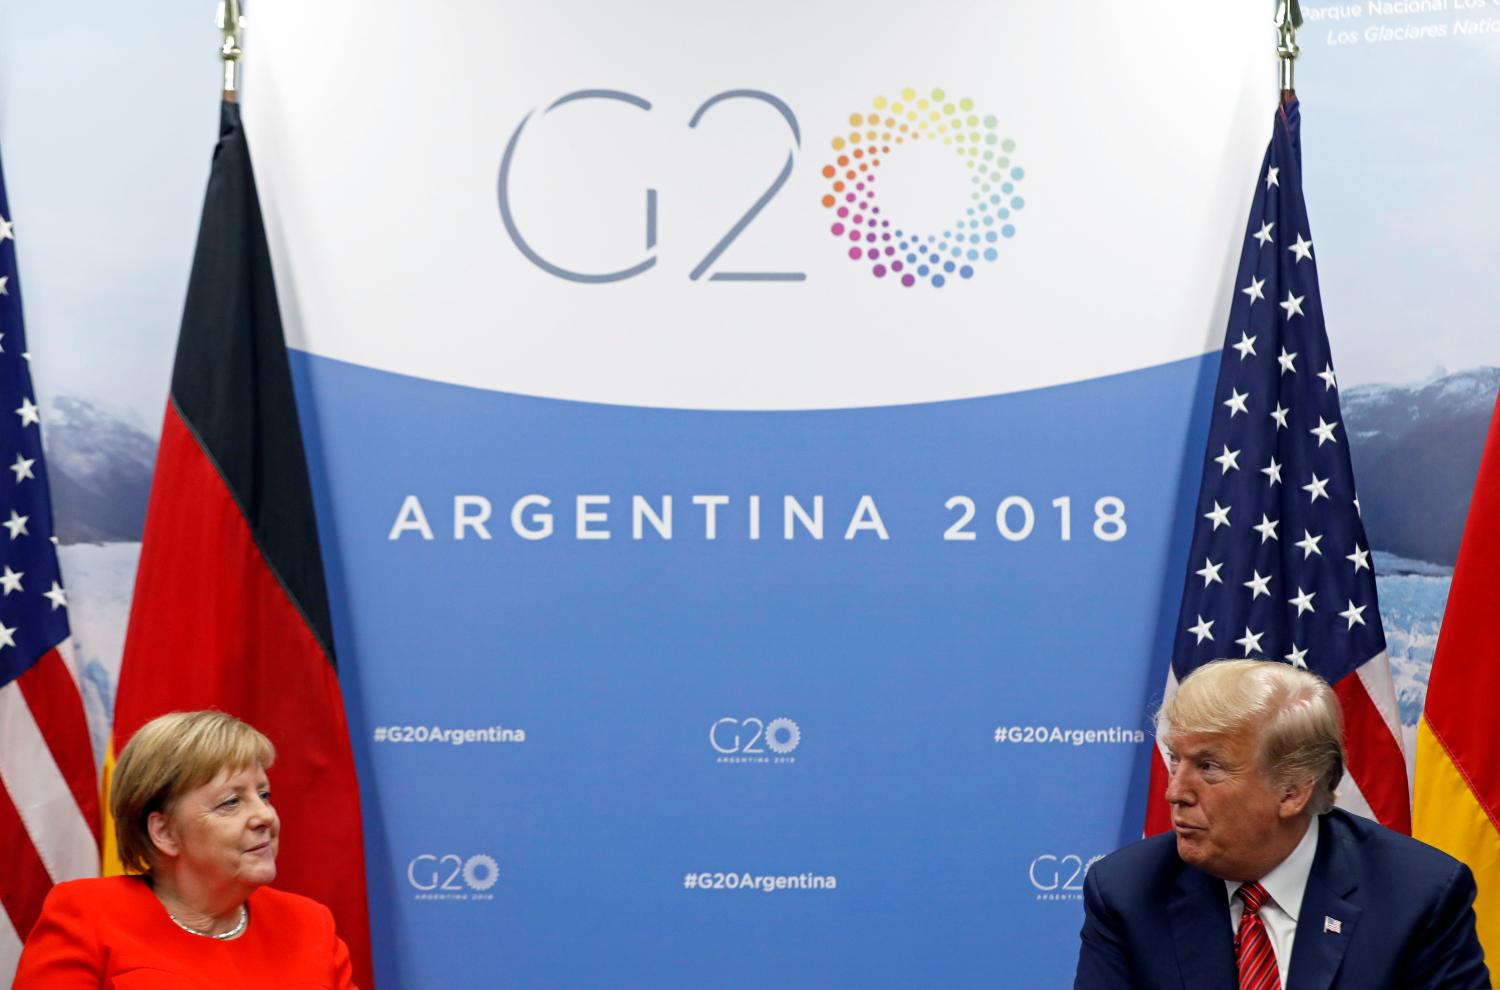 U.S. President Donald Trump and German Chancellor Angela Merkel attend a meeting during the G20 leaders summit in Buenos Aires, Argentina December 1, 2018. REUTERS/Kevin Lamarque - RC1835828BD0